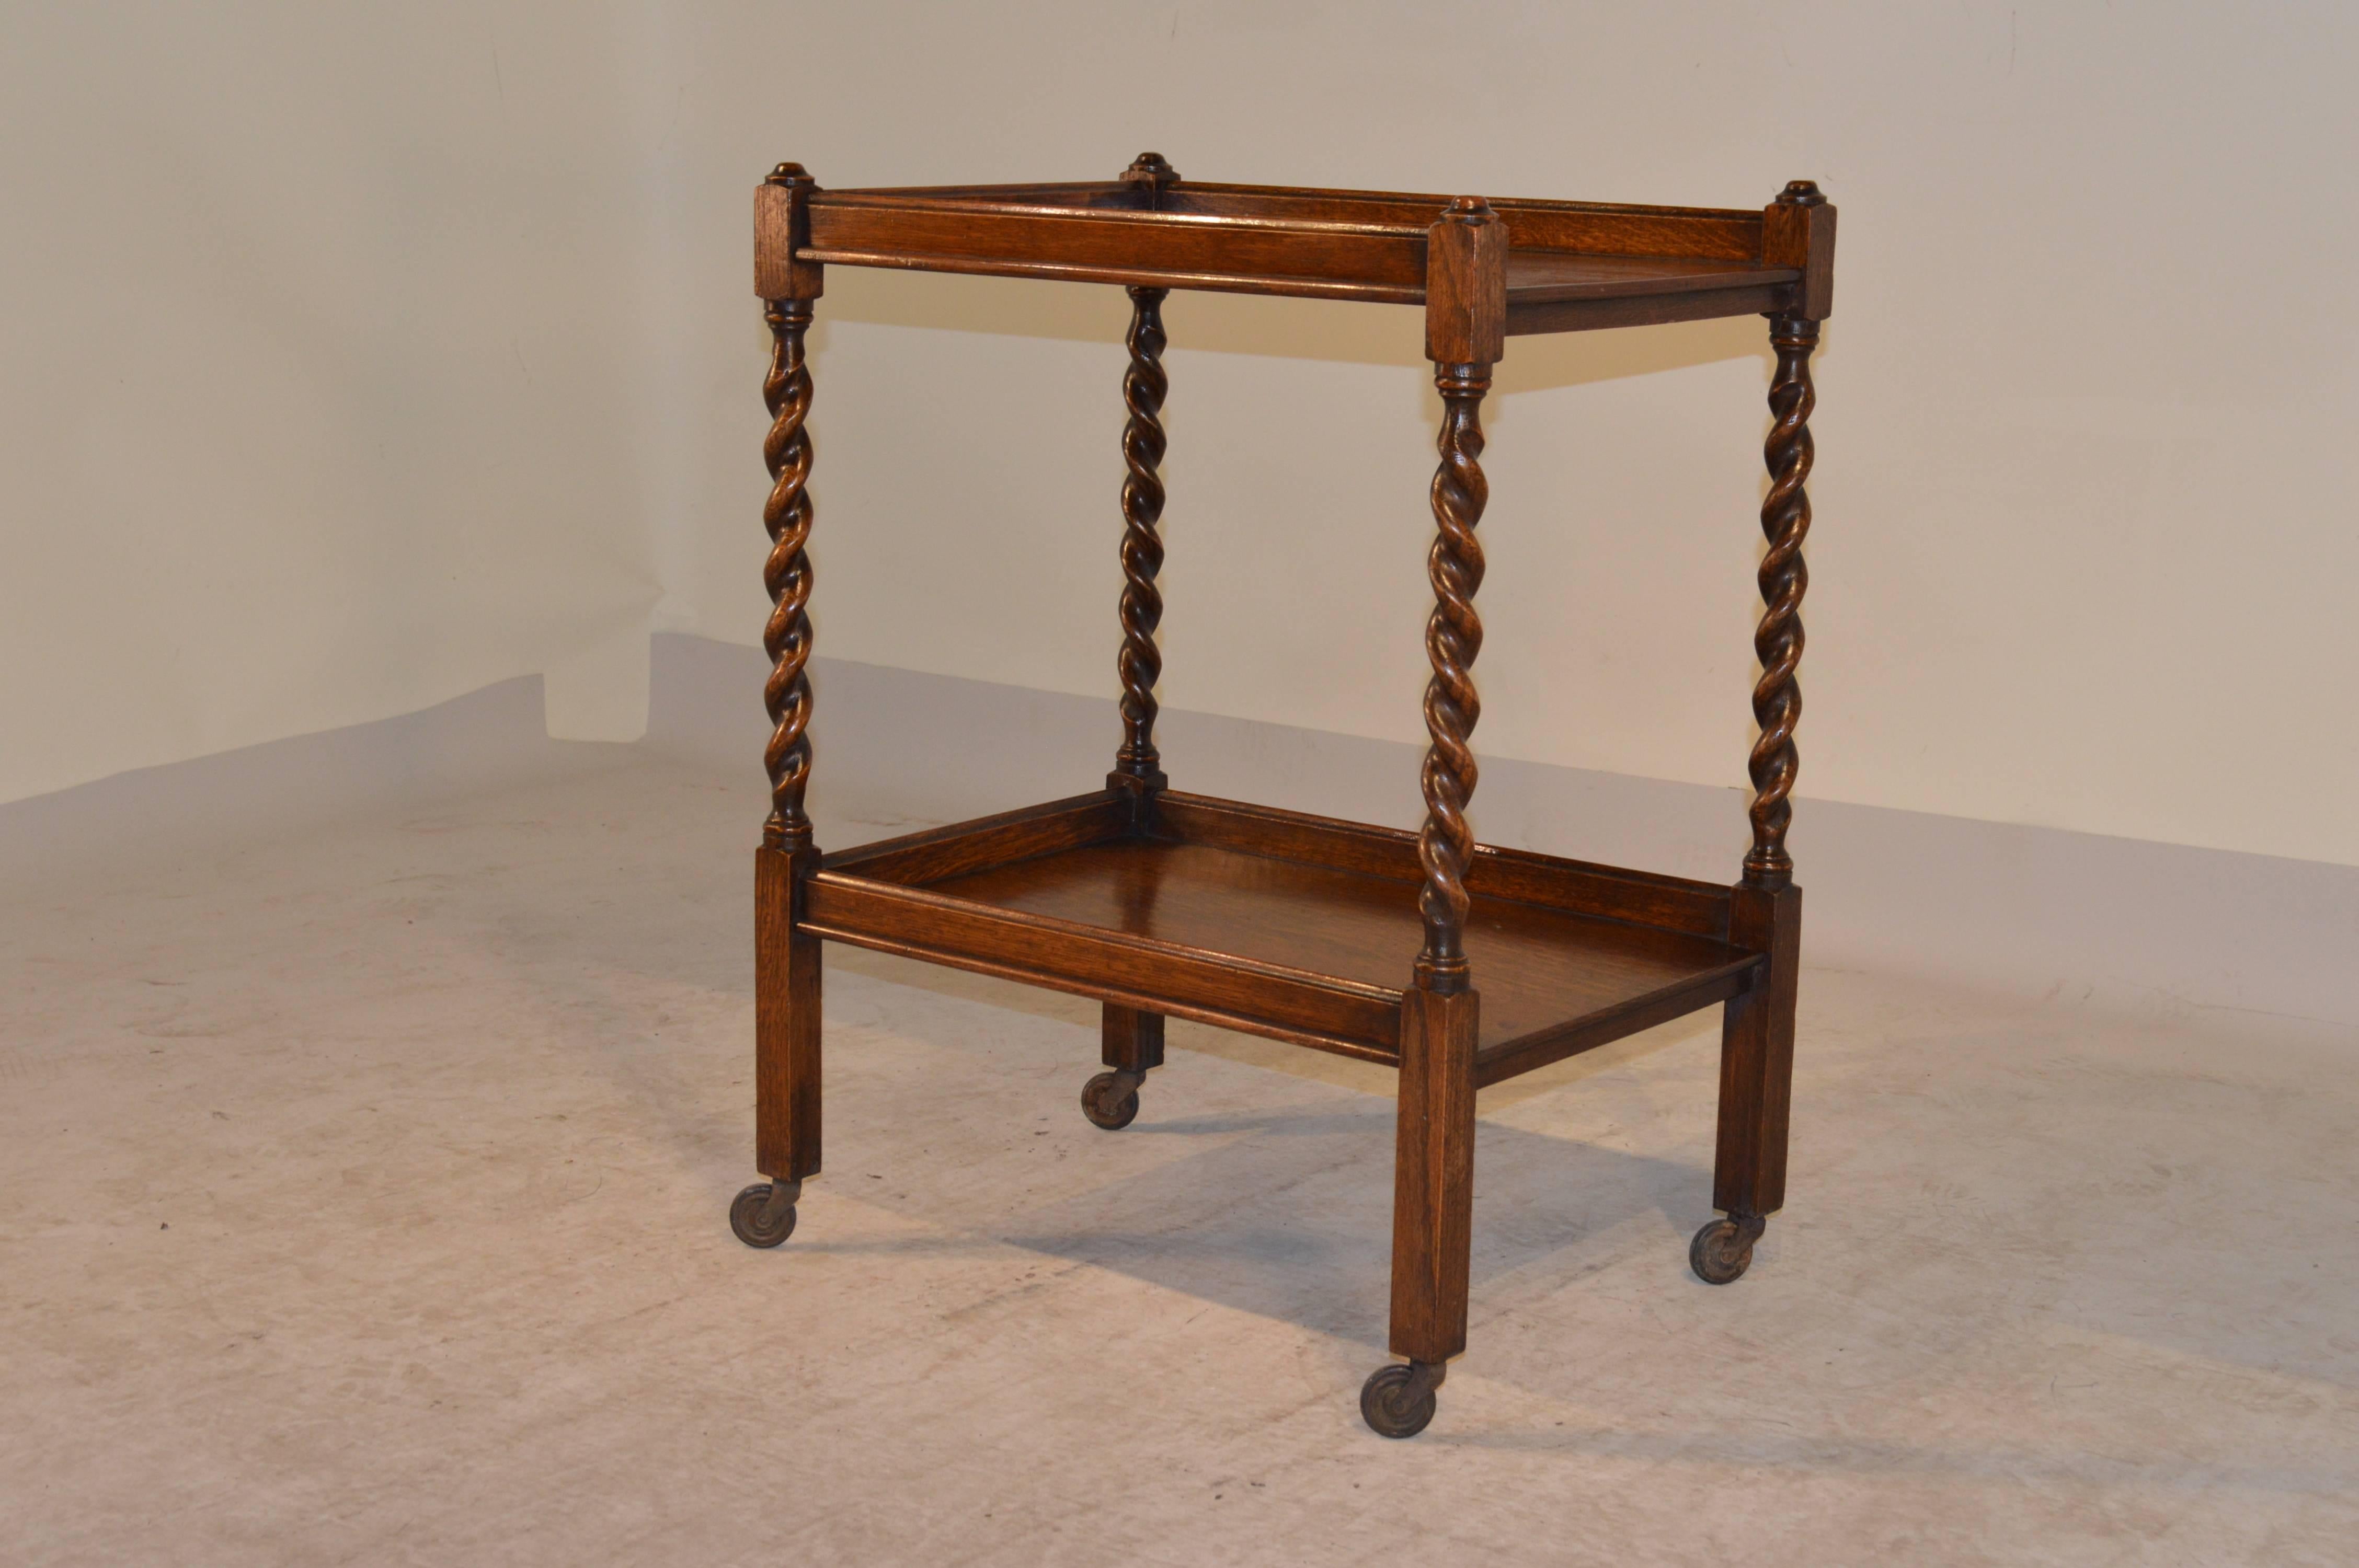 Circa 1900 English oak tea cart with two shelves and hand turned barley twist legs.  Finished with original casters.